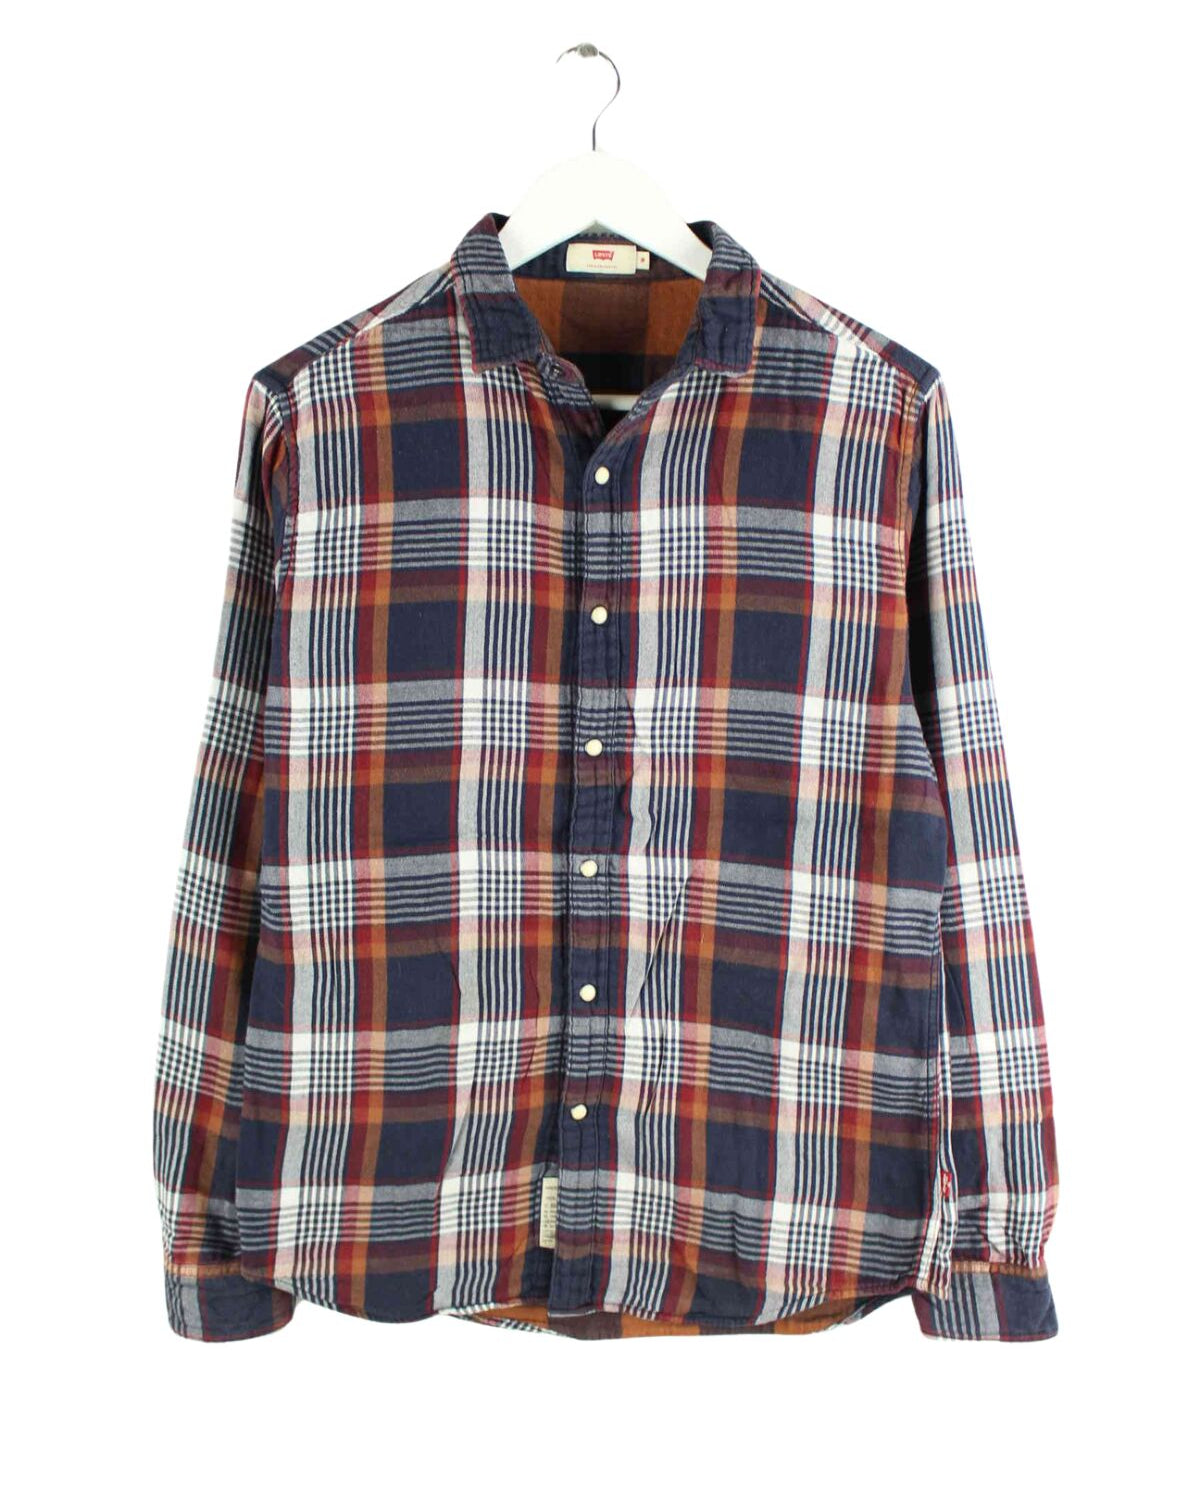 Levi's Flanell Hemd Mehrfarbig M (front image)